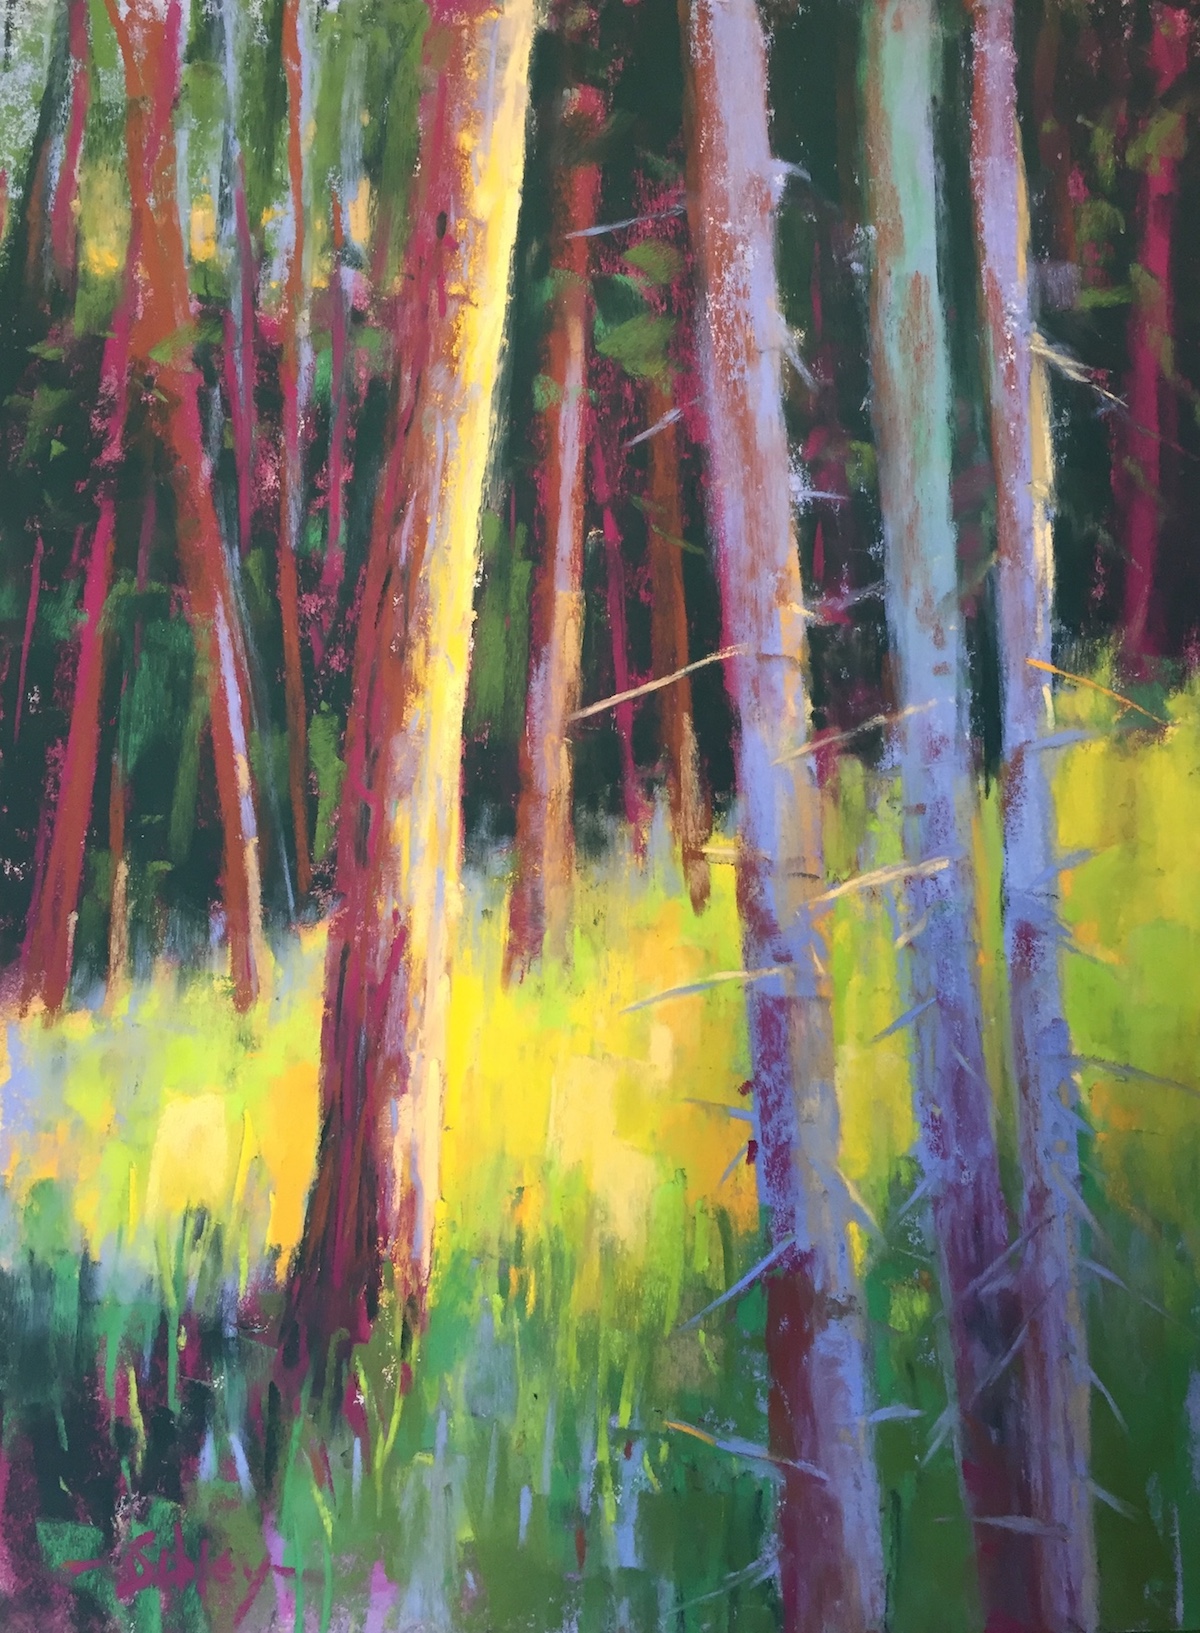 Painting summer greens in soft pastels: Gail Sibley, "Metchosin Woods," Unison pastels on UART 400, 12 x 9 in (photo with iPhone)